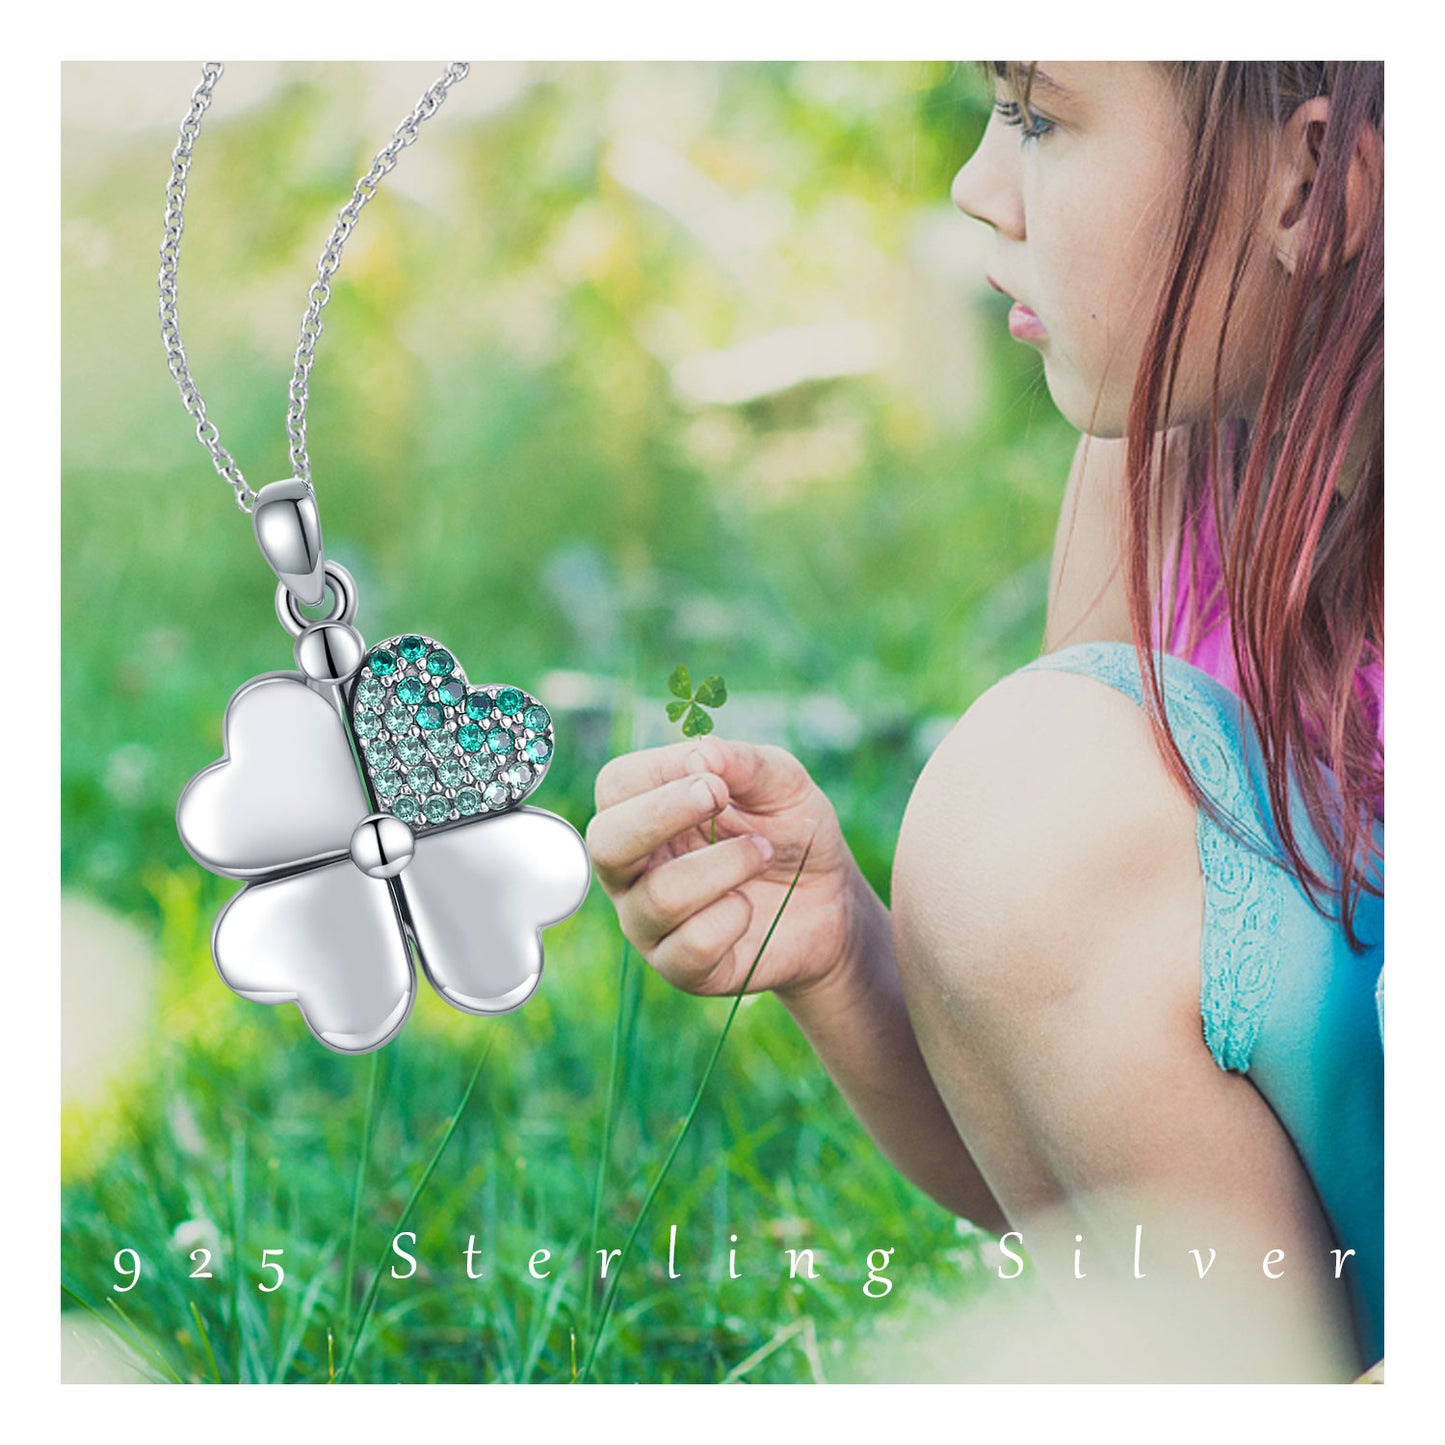 S925 Sterling Silver Four Leaf Clover Locket That Holds Pictures Irish Pendant Necklace